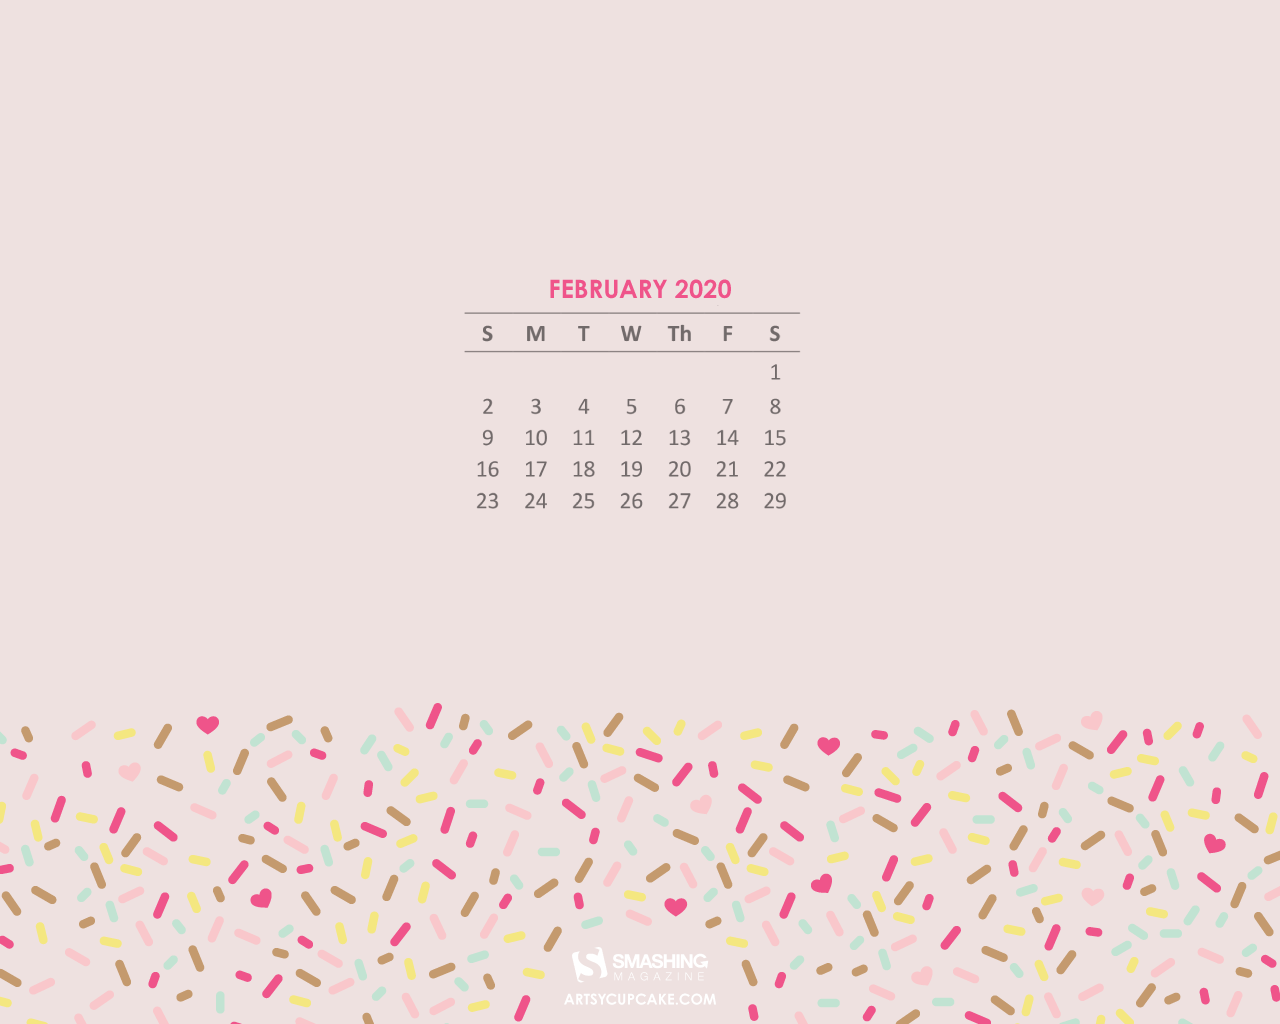 Days Of February (2020 Wallpaper Edition)